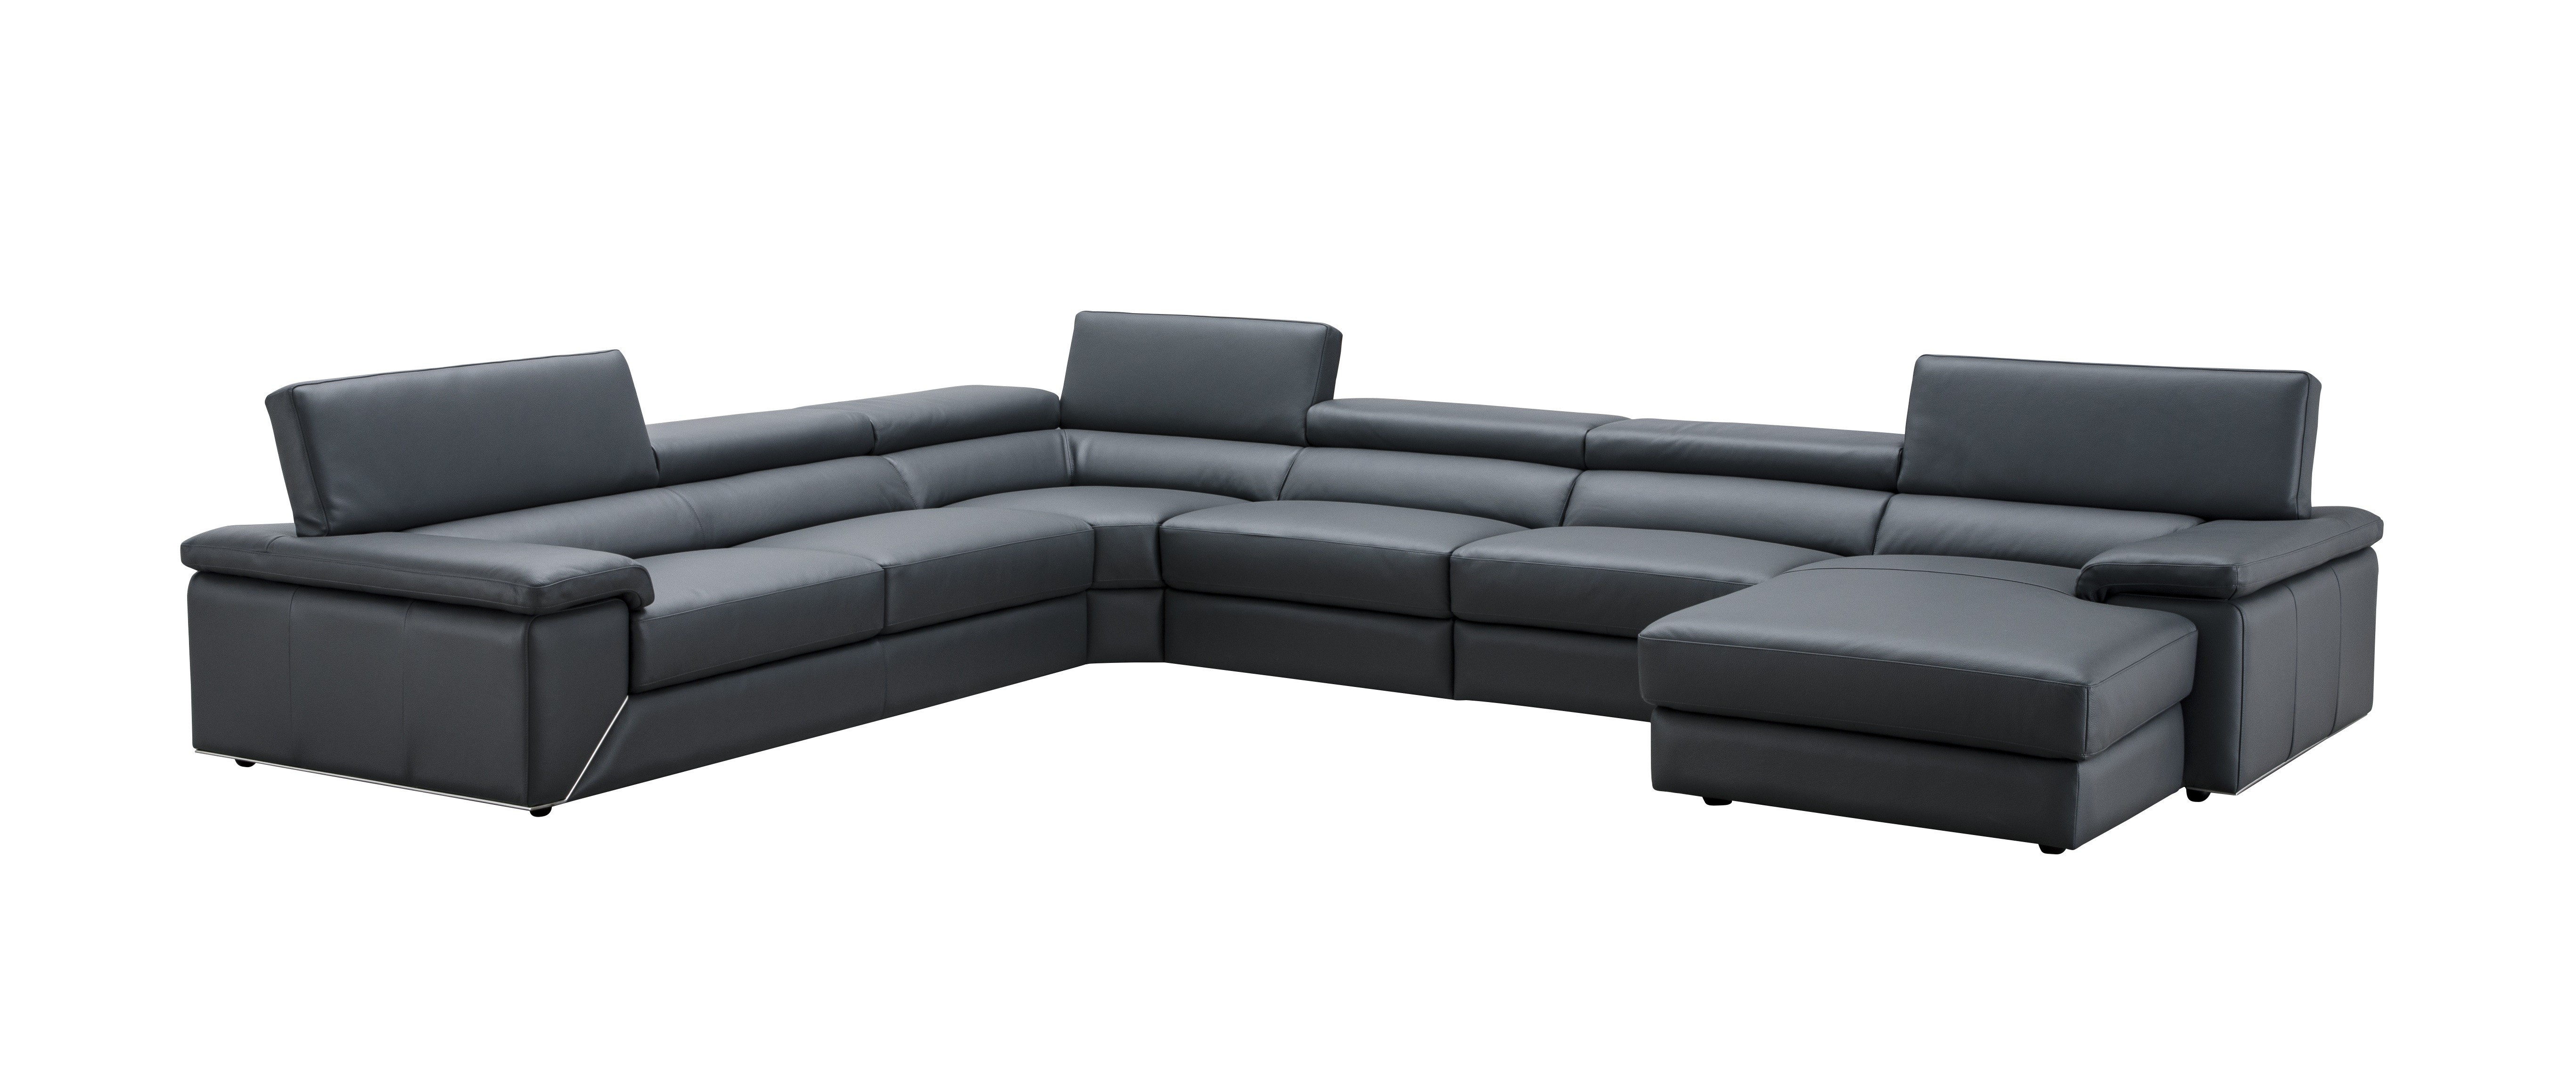 Advanced Adjustable Italian Leather Living Room Furniture - Click Image to Close